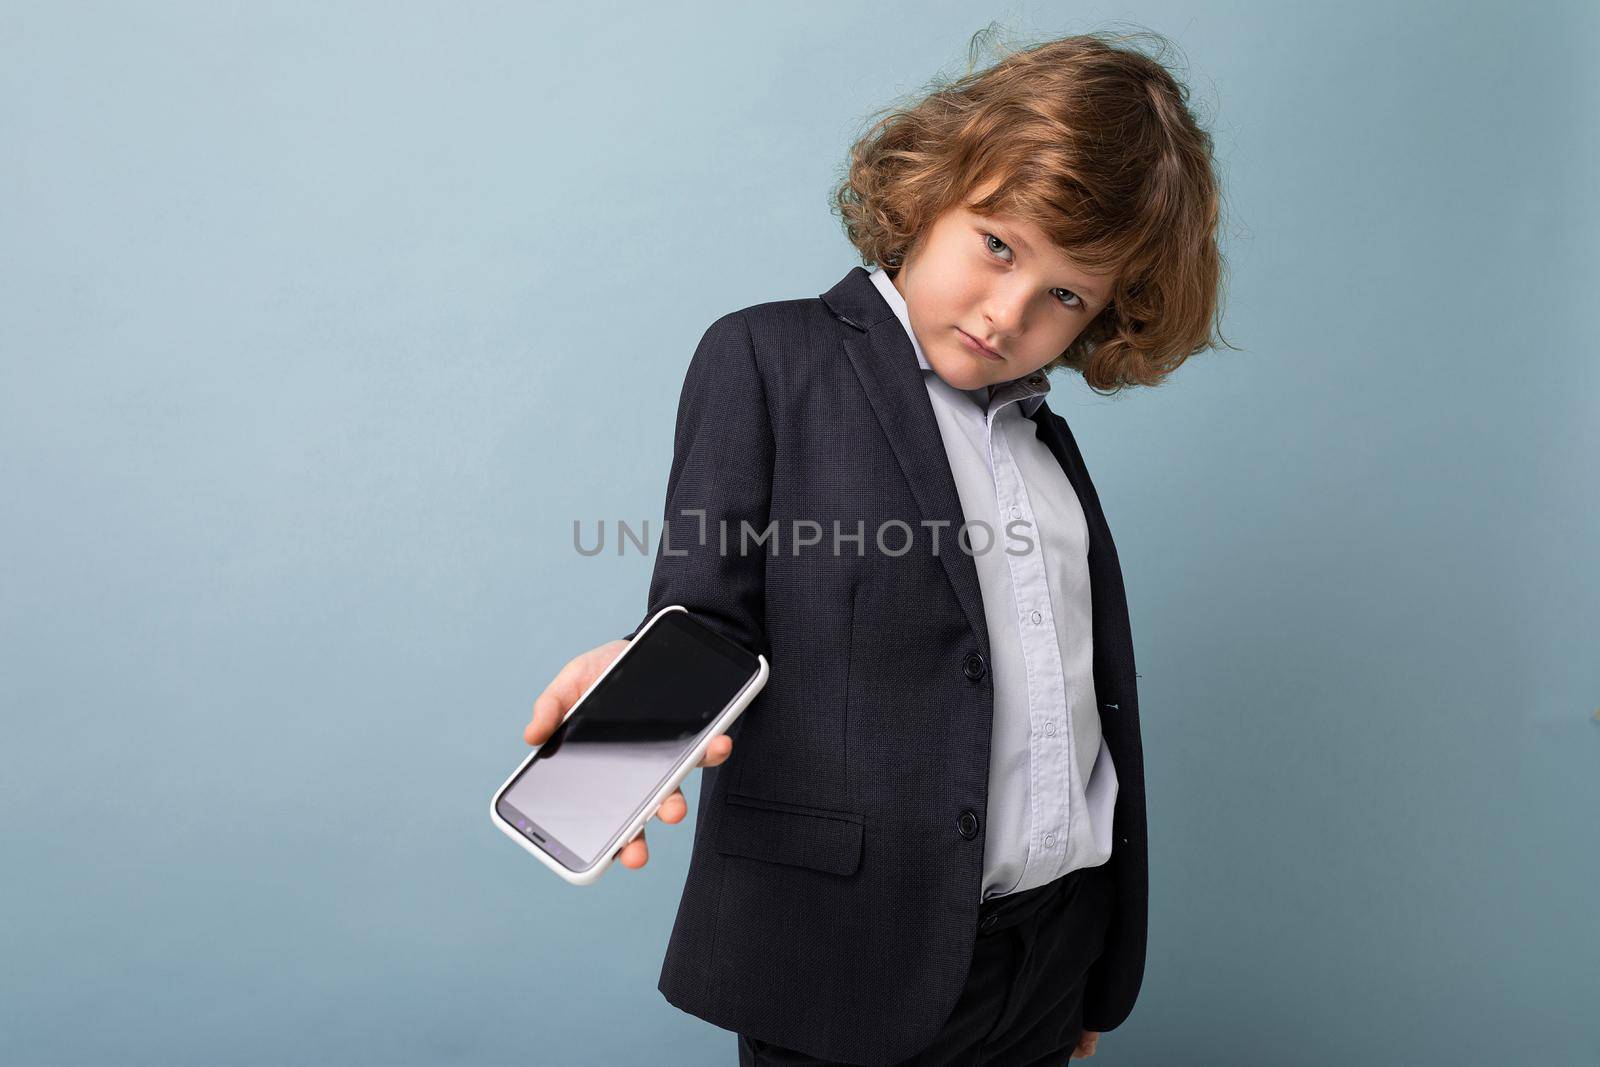 Handsome positive boy with curly hair wearing suit holding phone isolated over blue background looking at camera and showing smartphone with empty display screen by TRMK